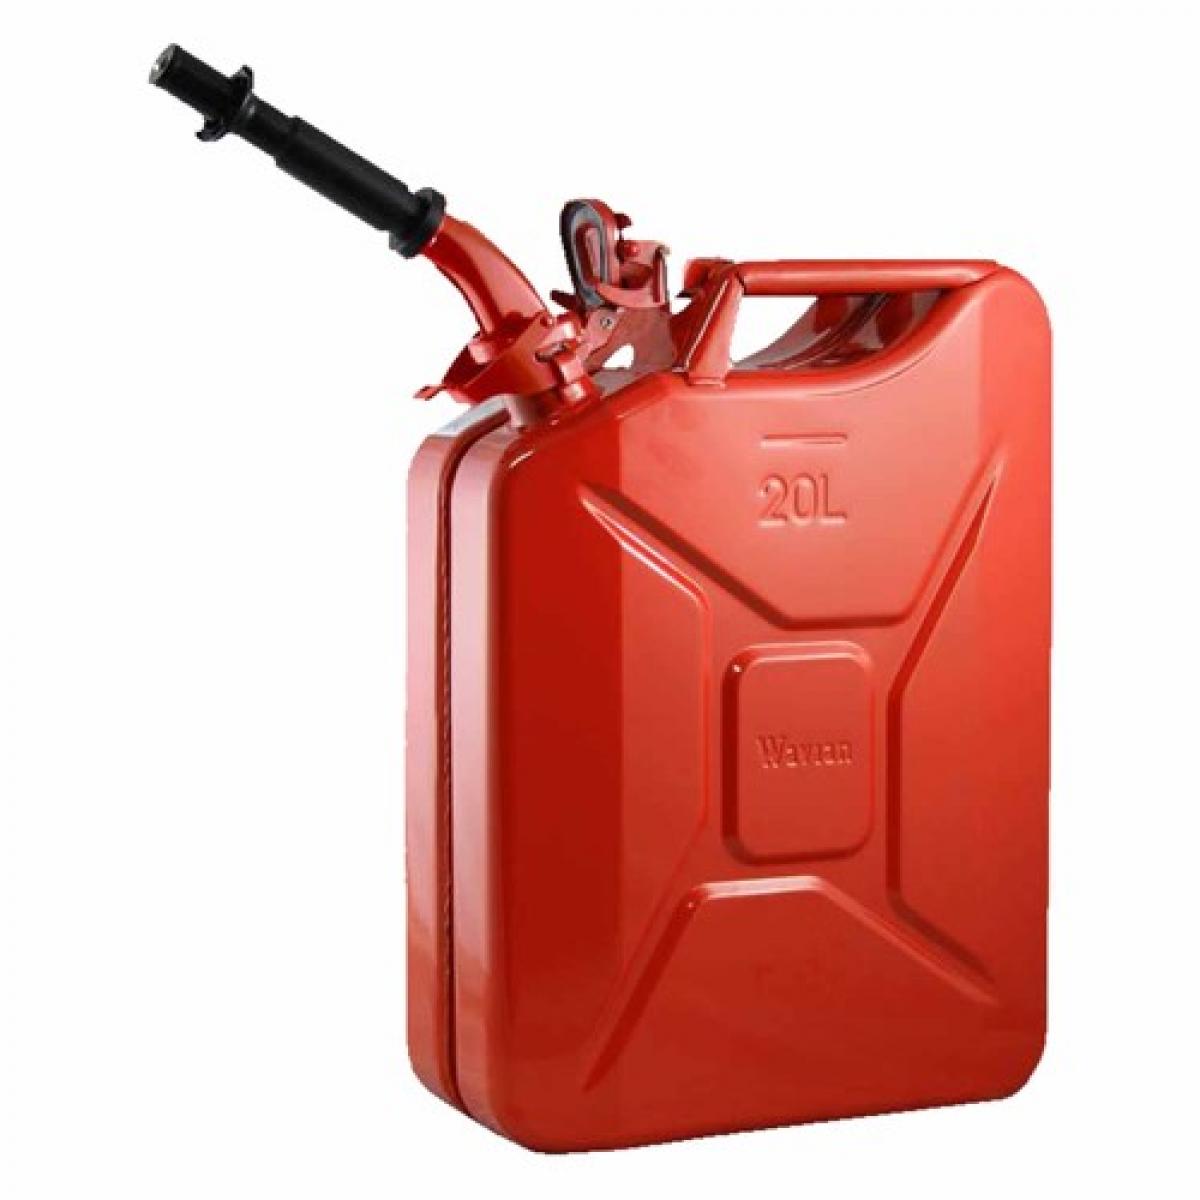 Wavian Red 5.3 Gallon Fuel Can